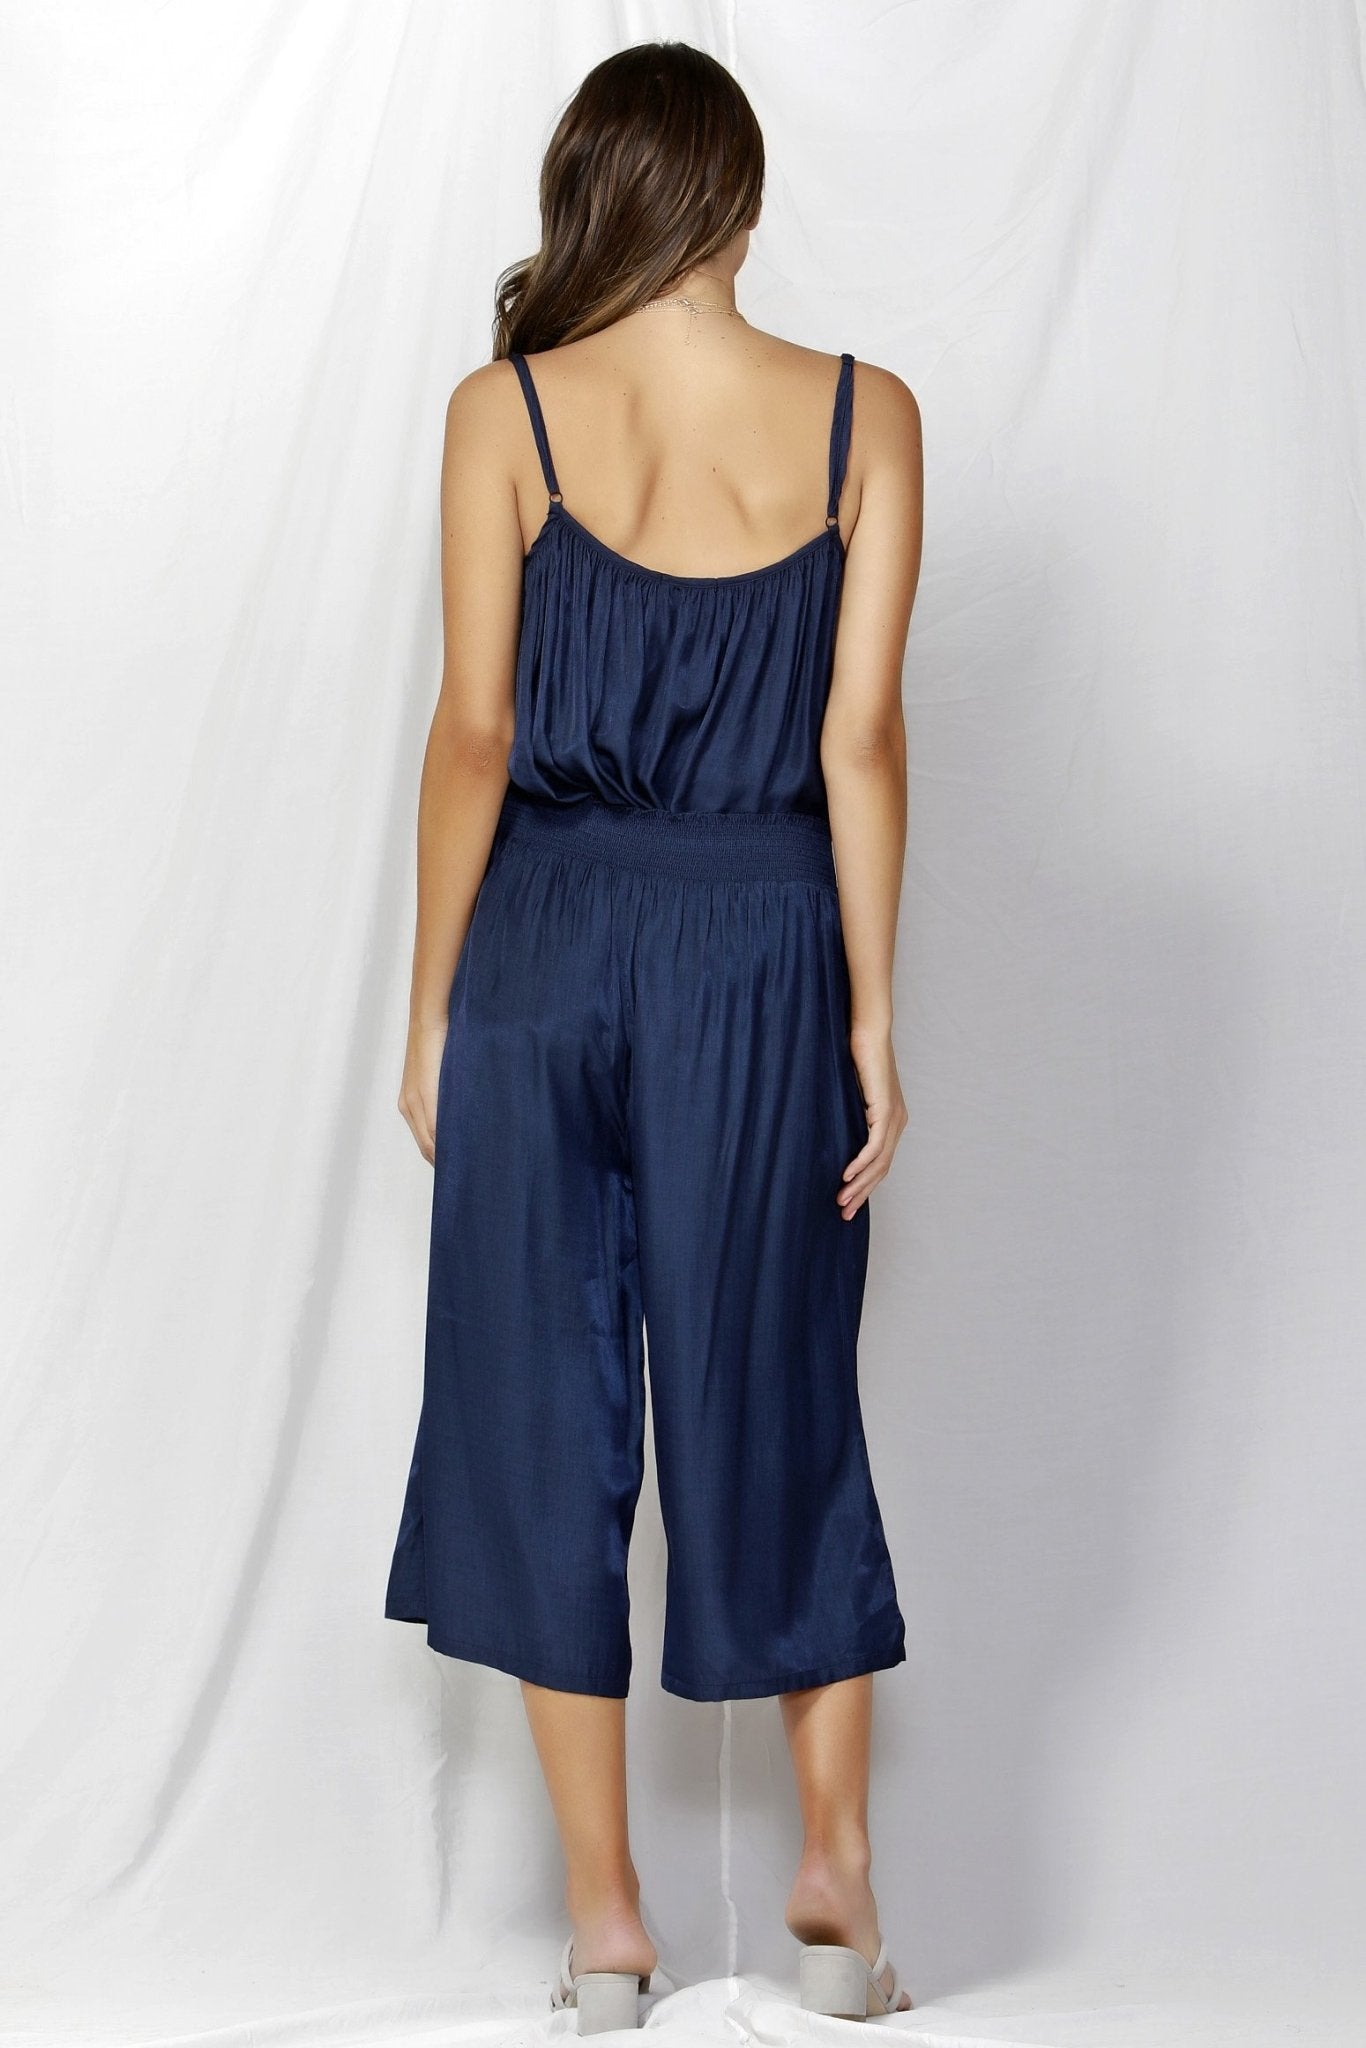 Fate + Becker So Me Shirred Waist Culottes in Navy SIZE XS OR L ONLY - Hey Sara